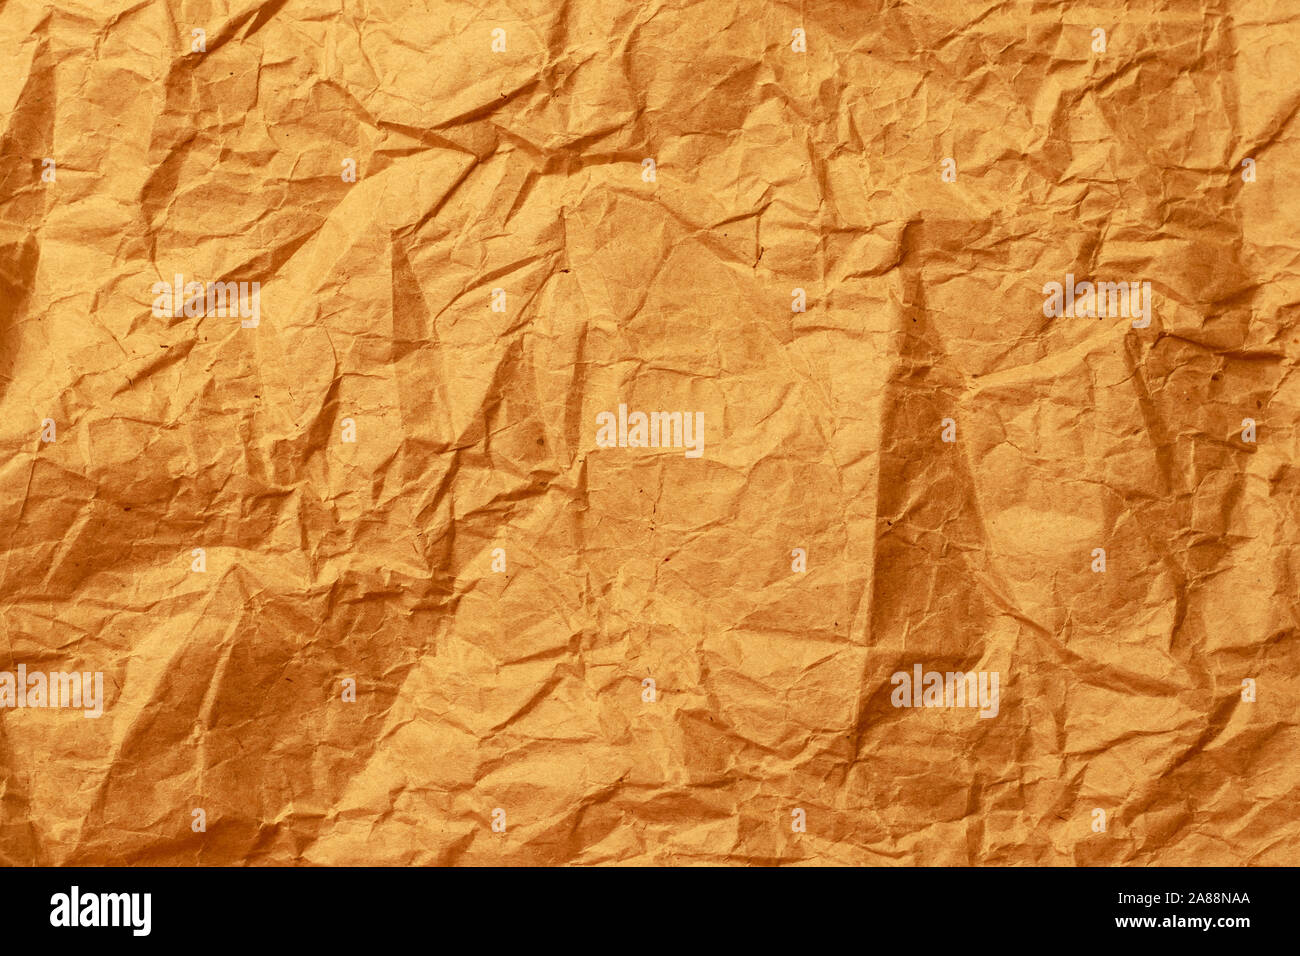 Old Wrinkled Paper Background Papers Folds Wrinkles Brown Parchment Texture  Stock Photo - Download Image Now - iStock